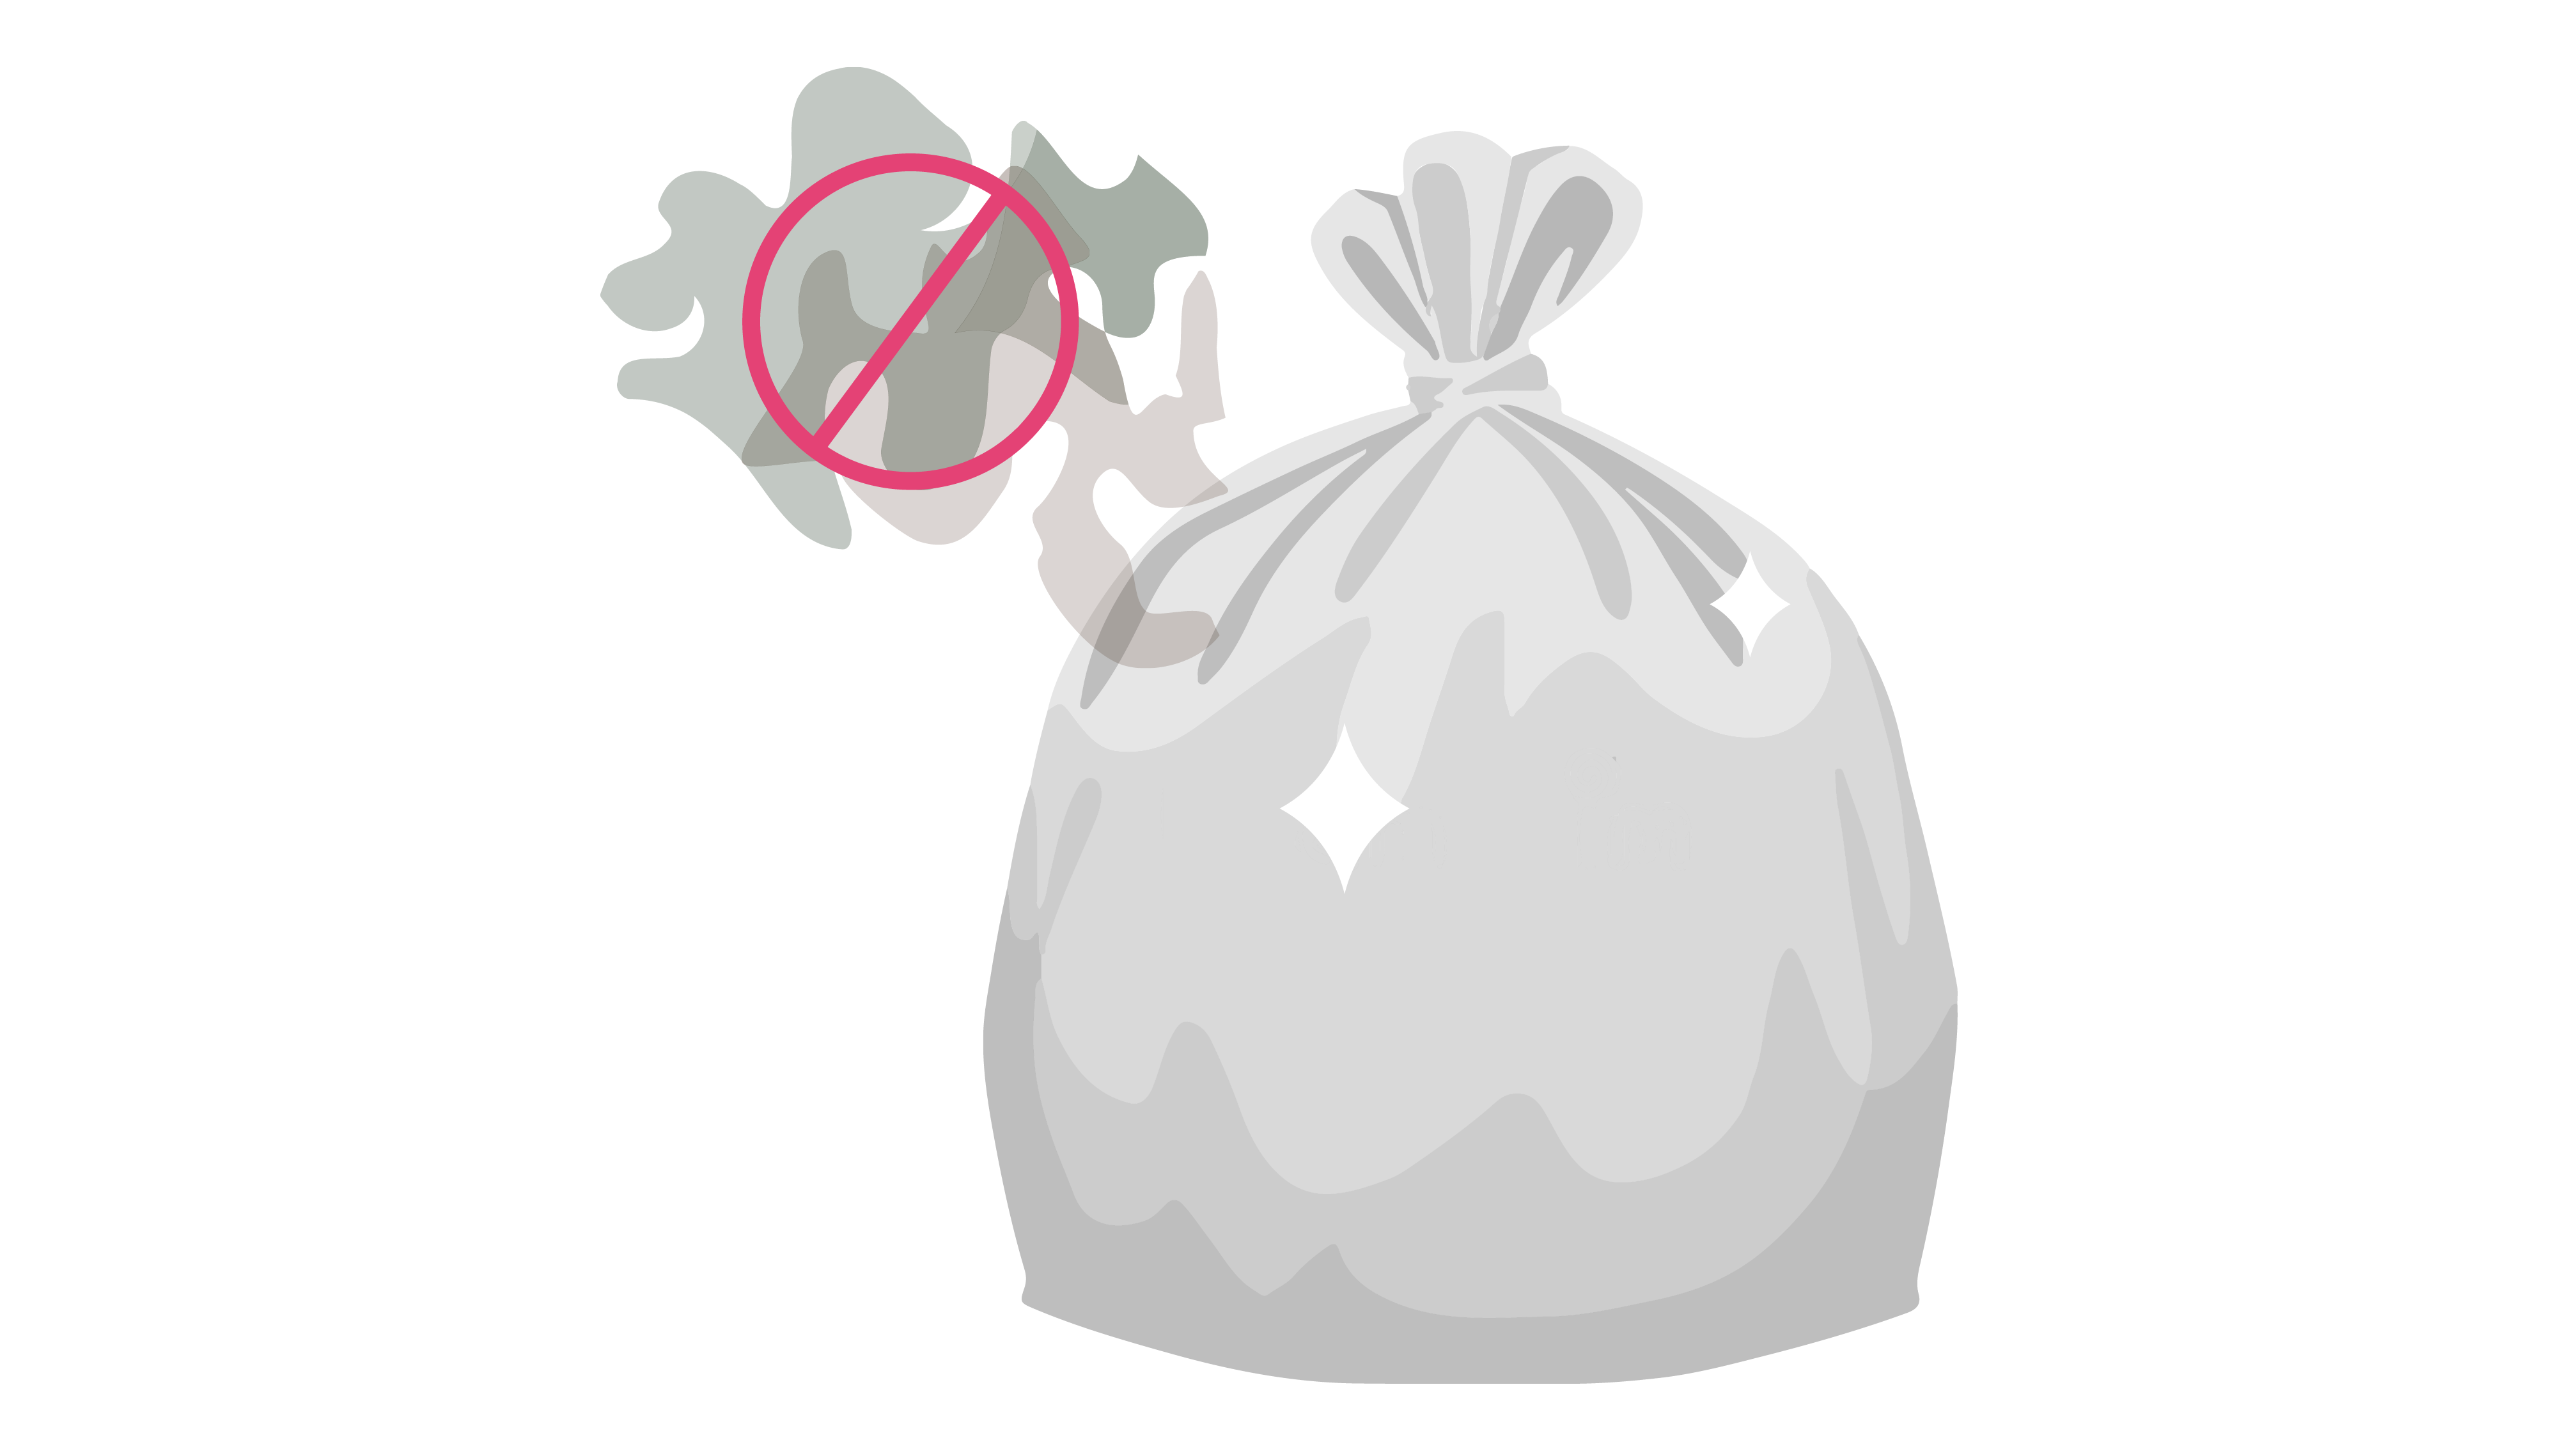 Grey garbage bag that gradually gets darker going to the bottom. Different shades of grey clouds coming from bag with a red prohibited symbol overtop.